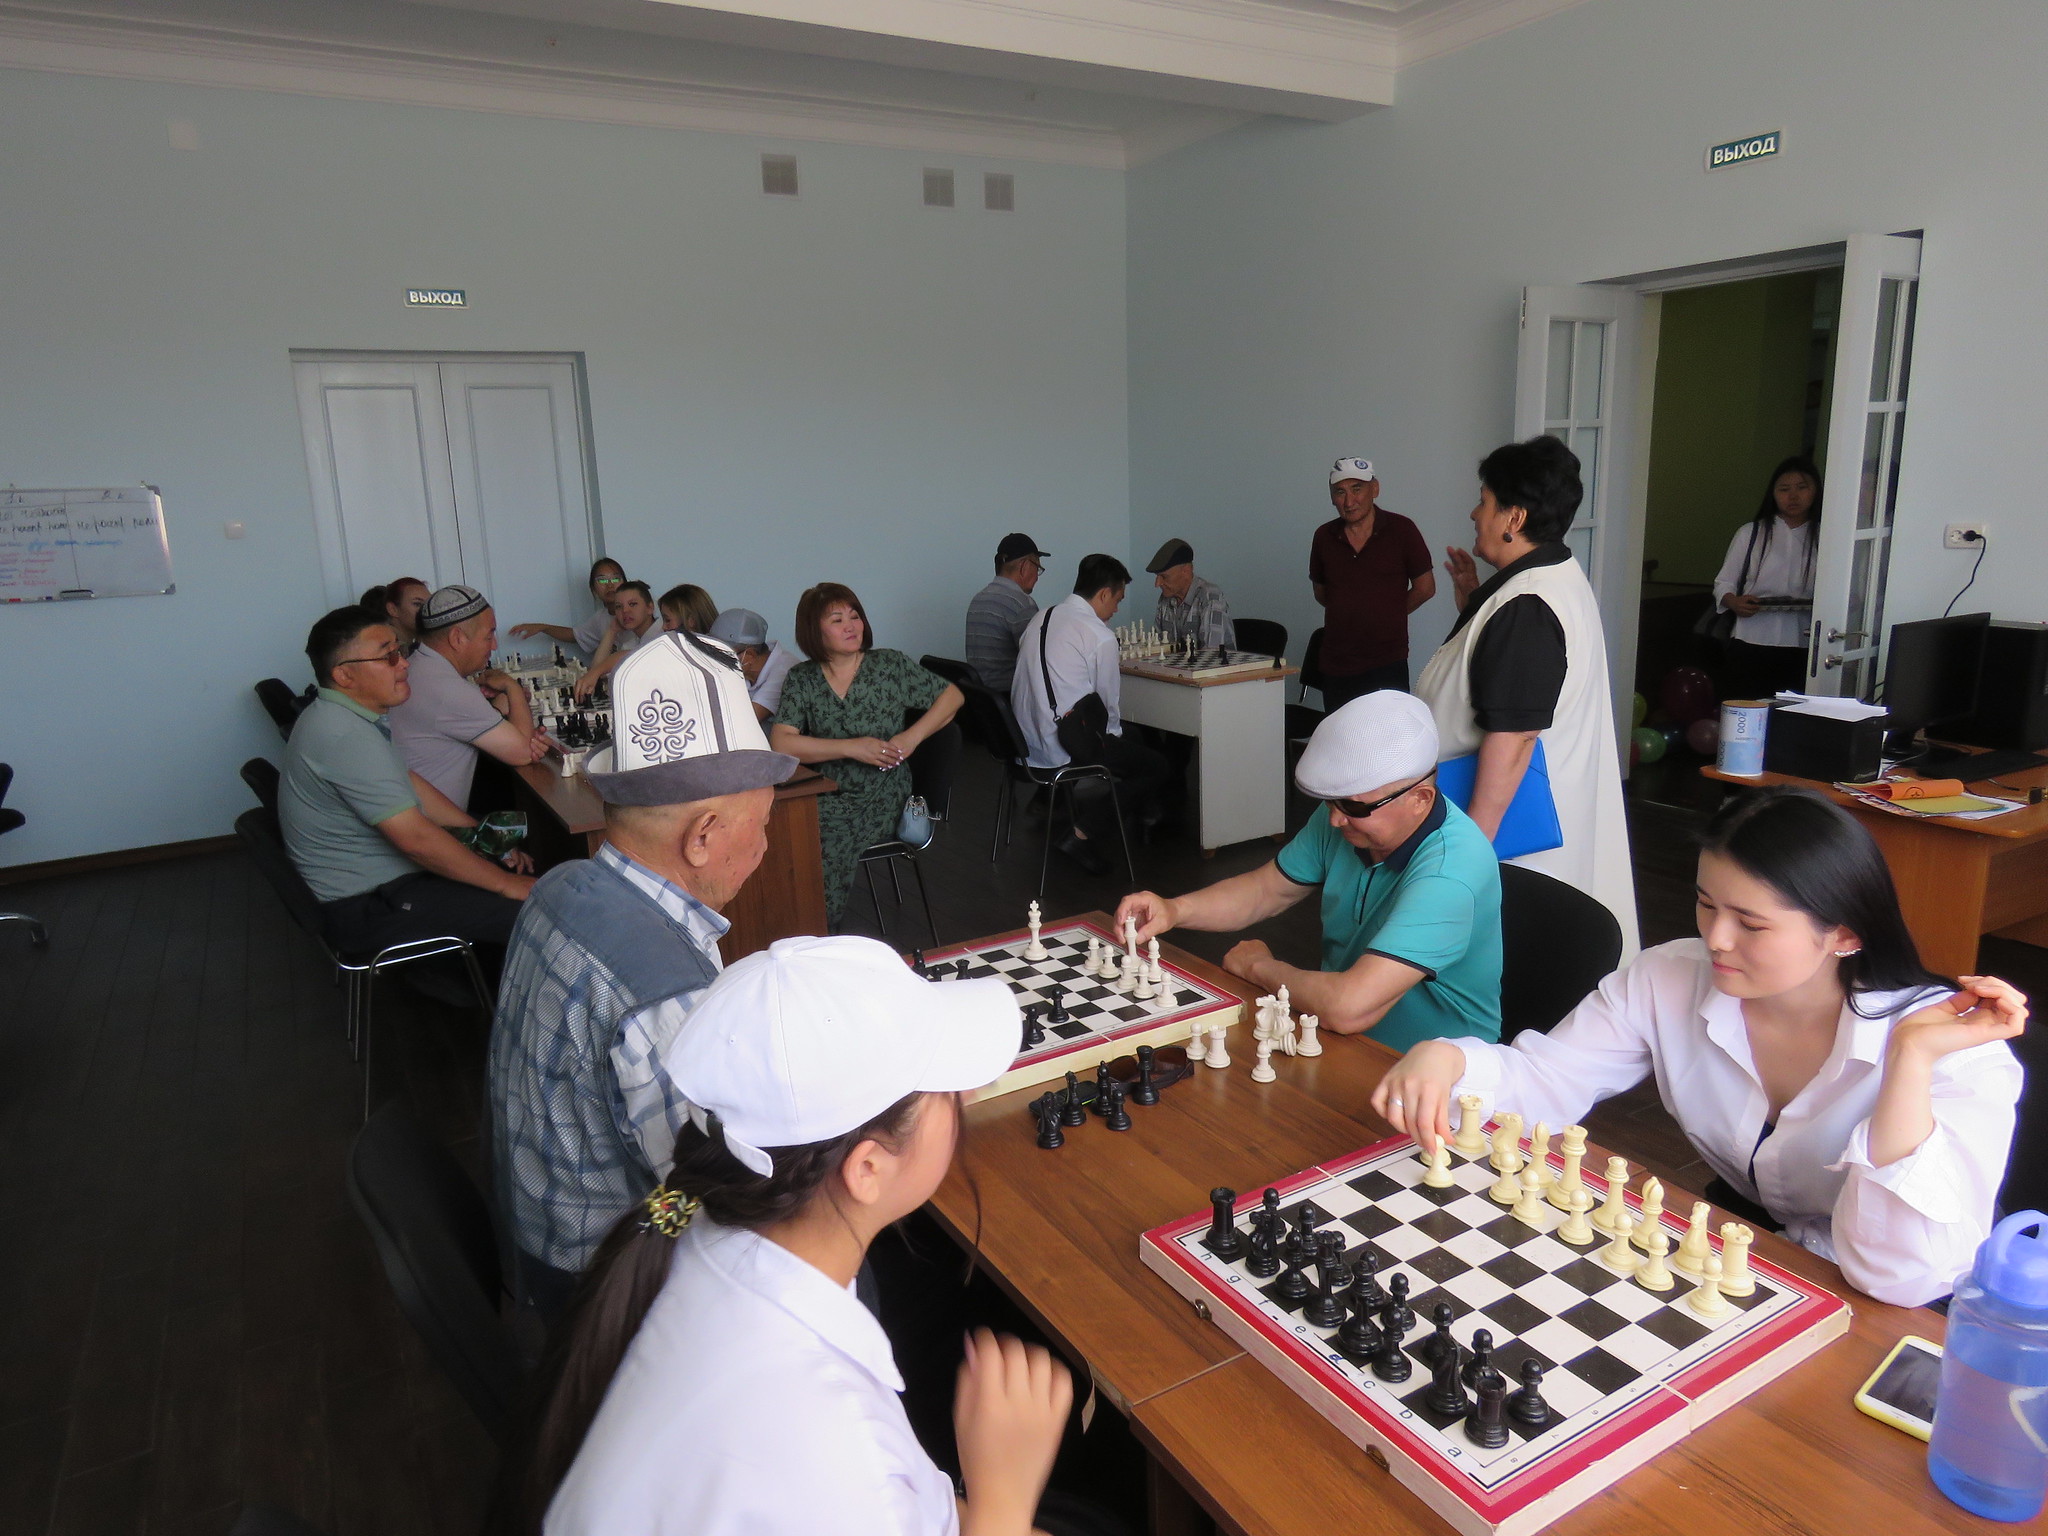 Citizens playing a game at the community center